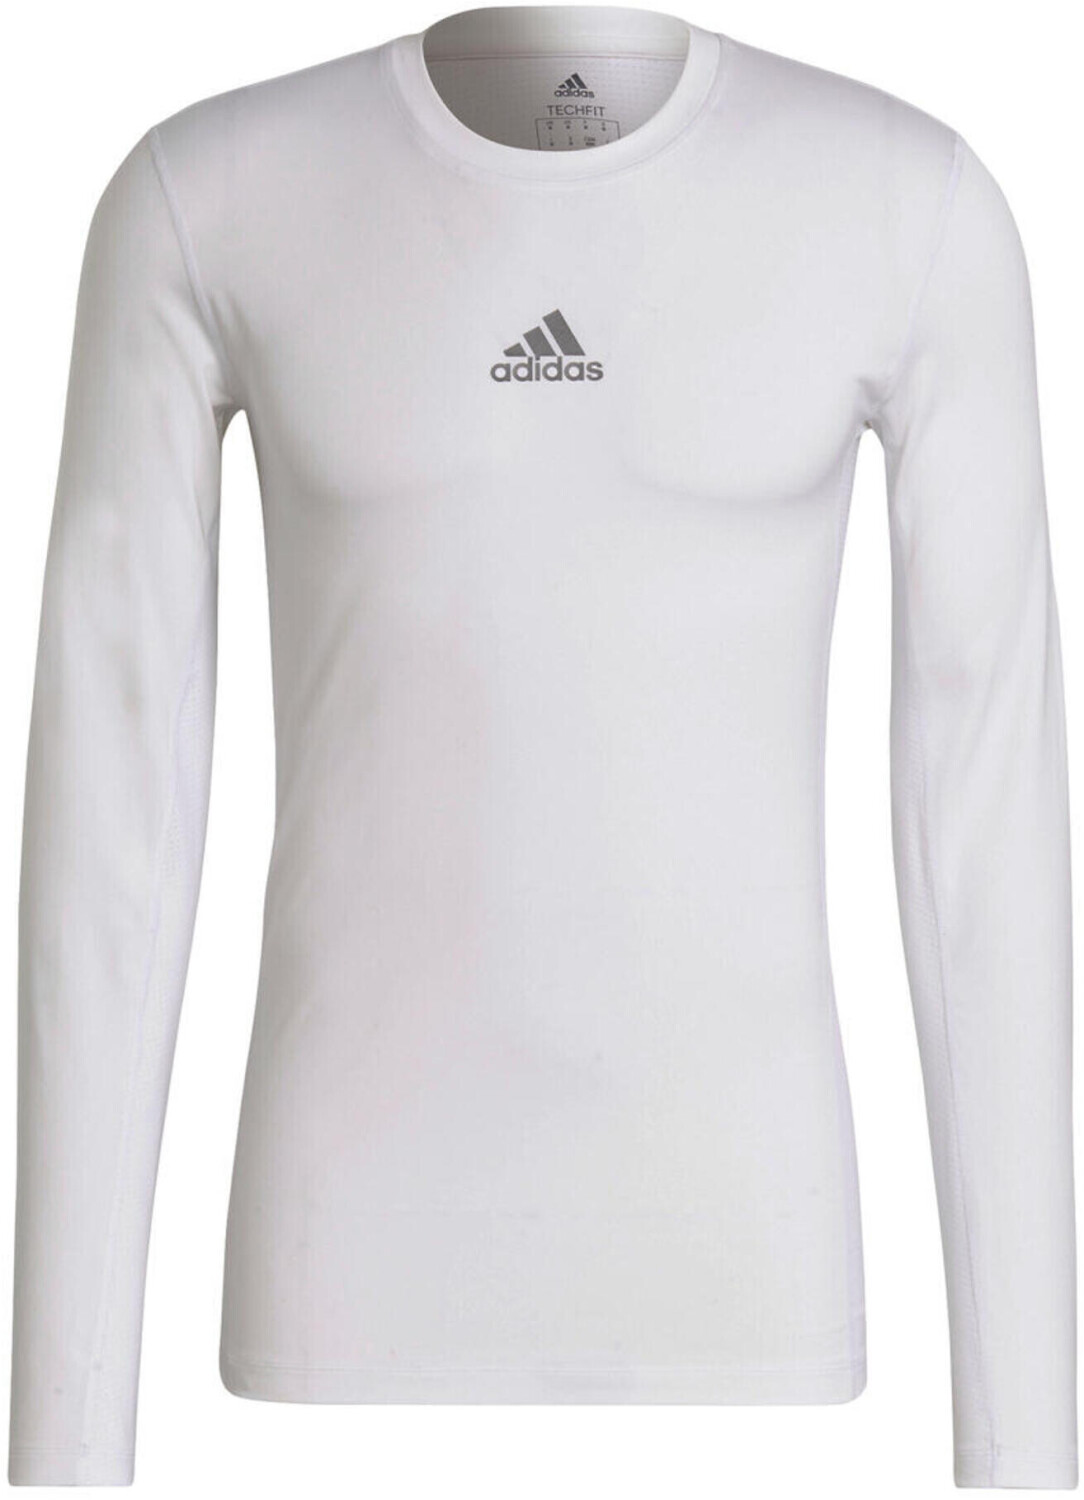 Buy Adidas TechFit Compression Long Sleeve Tee from £17.00 (Today) – Best  Deals on